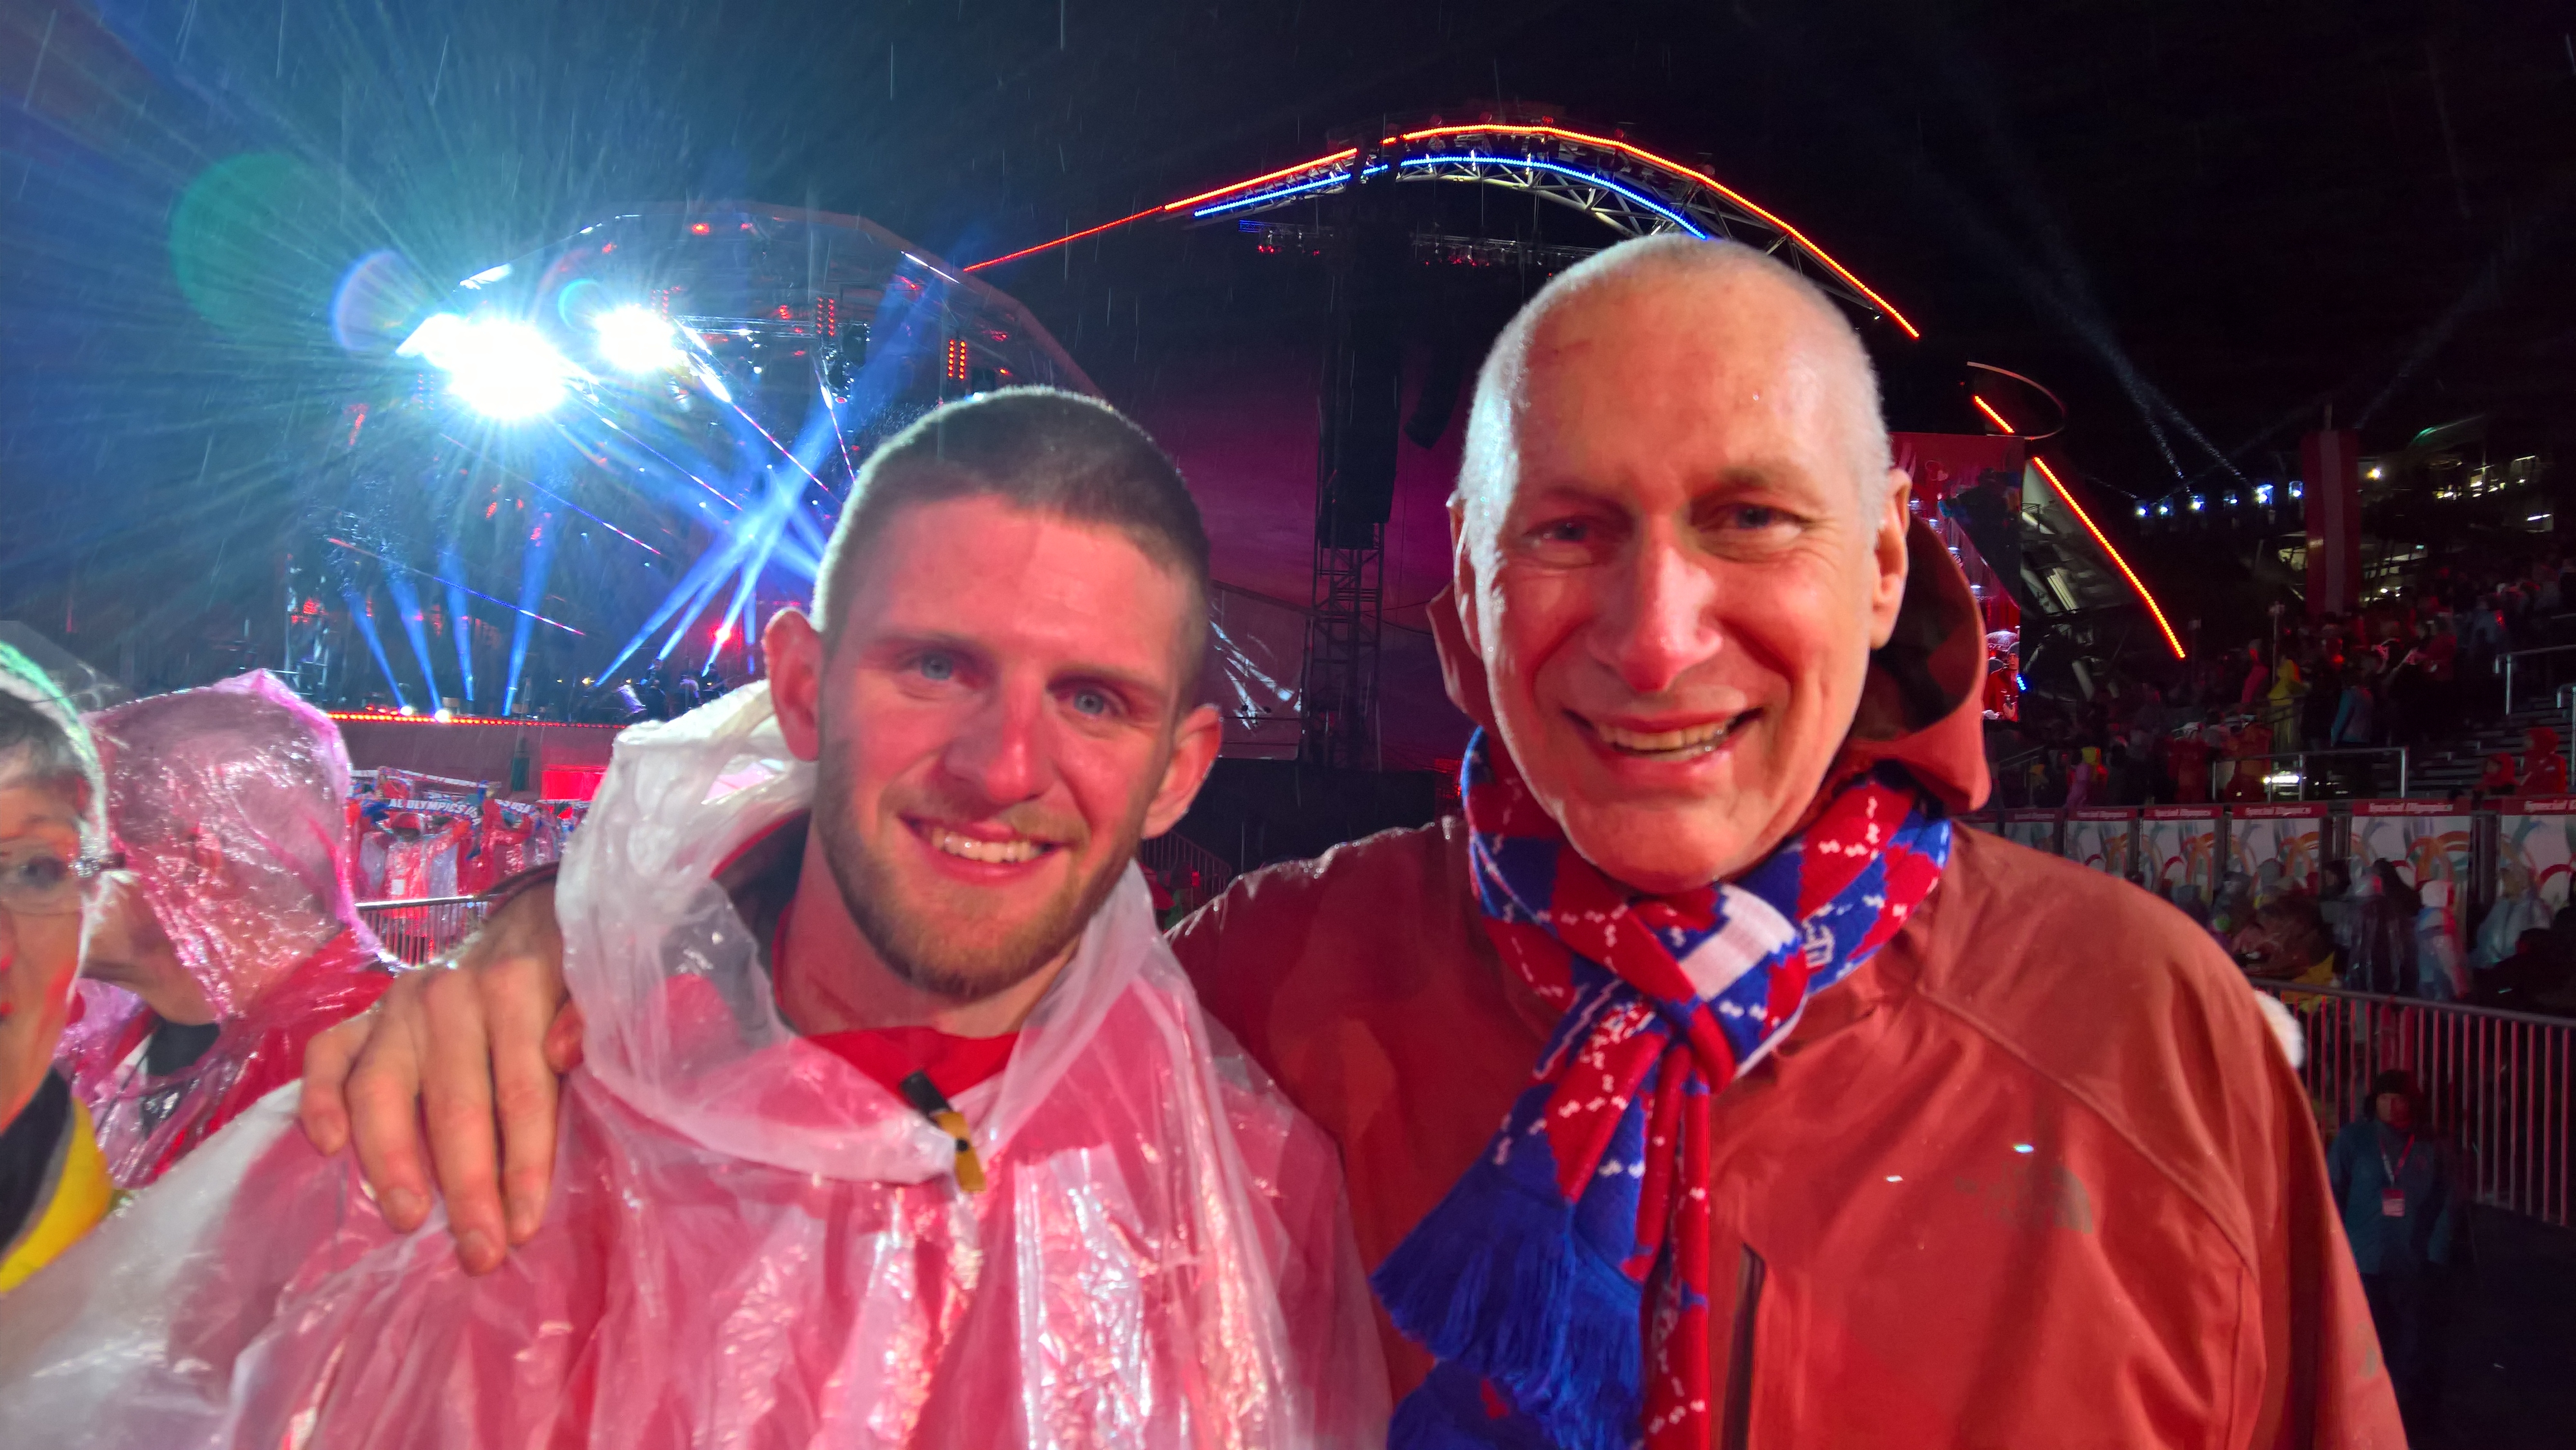 With Special Olympics USA skier Gary Endecott, from Wyoming. (Courtesy of John Skipper)